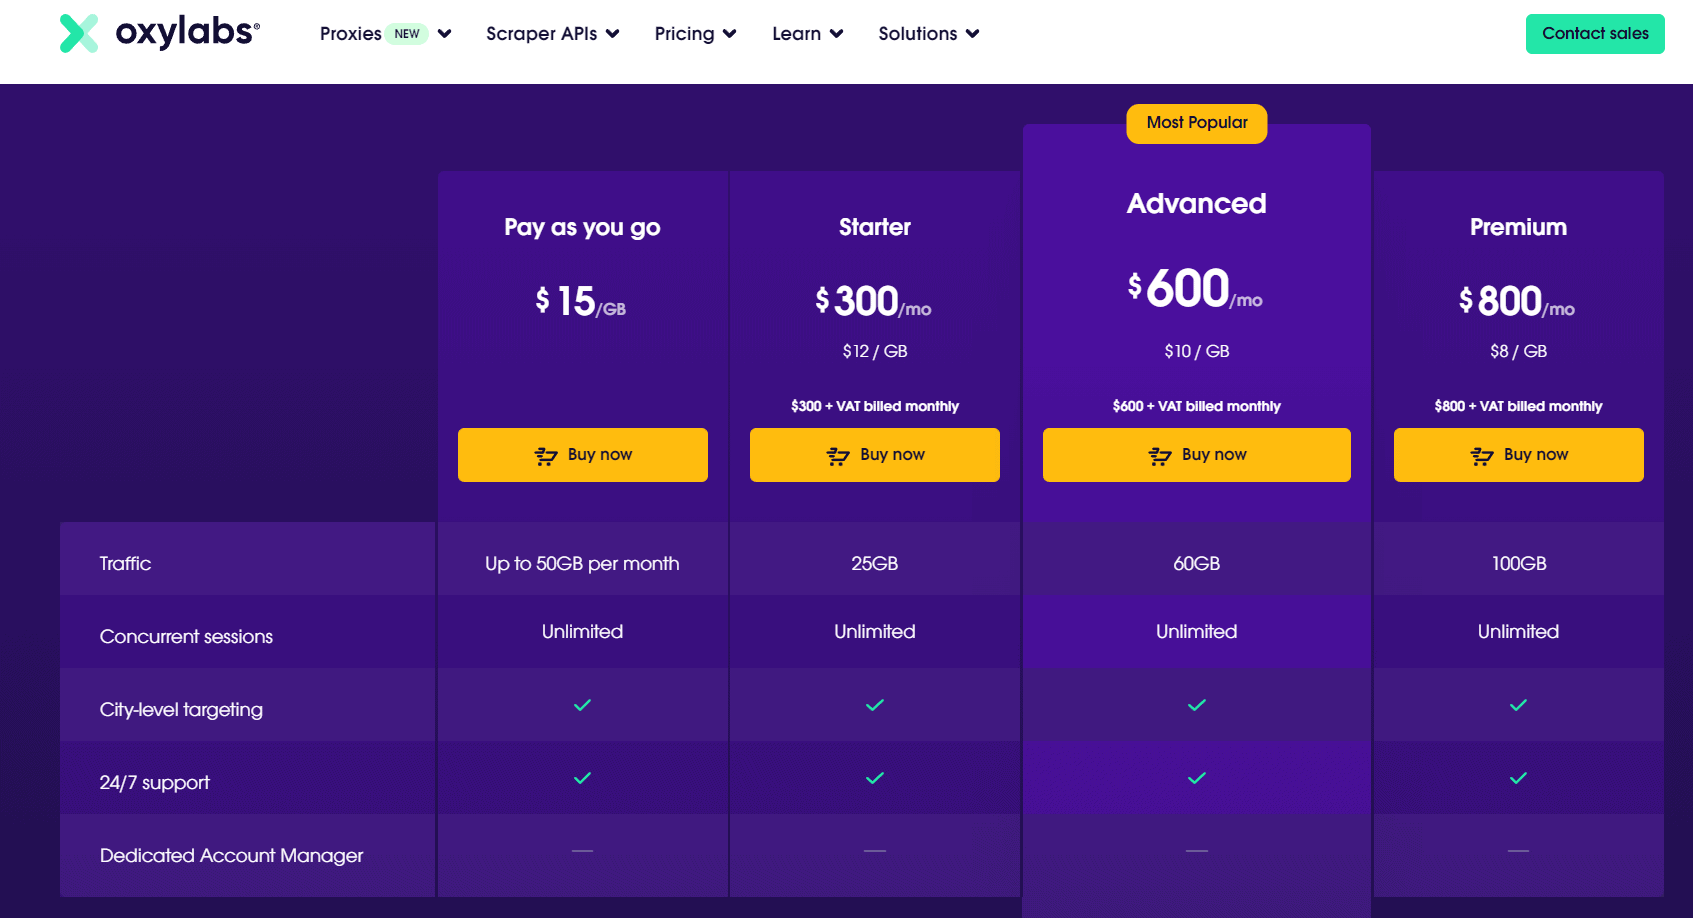 Oxylabs pricing